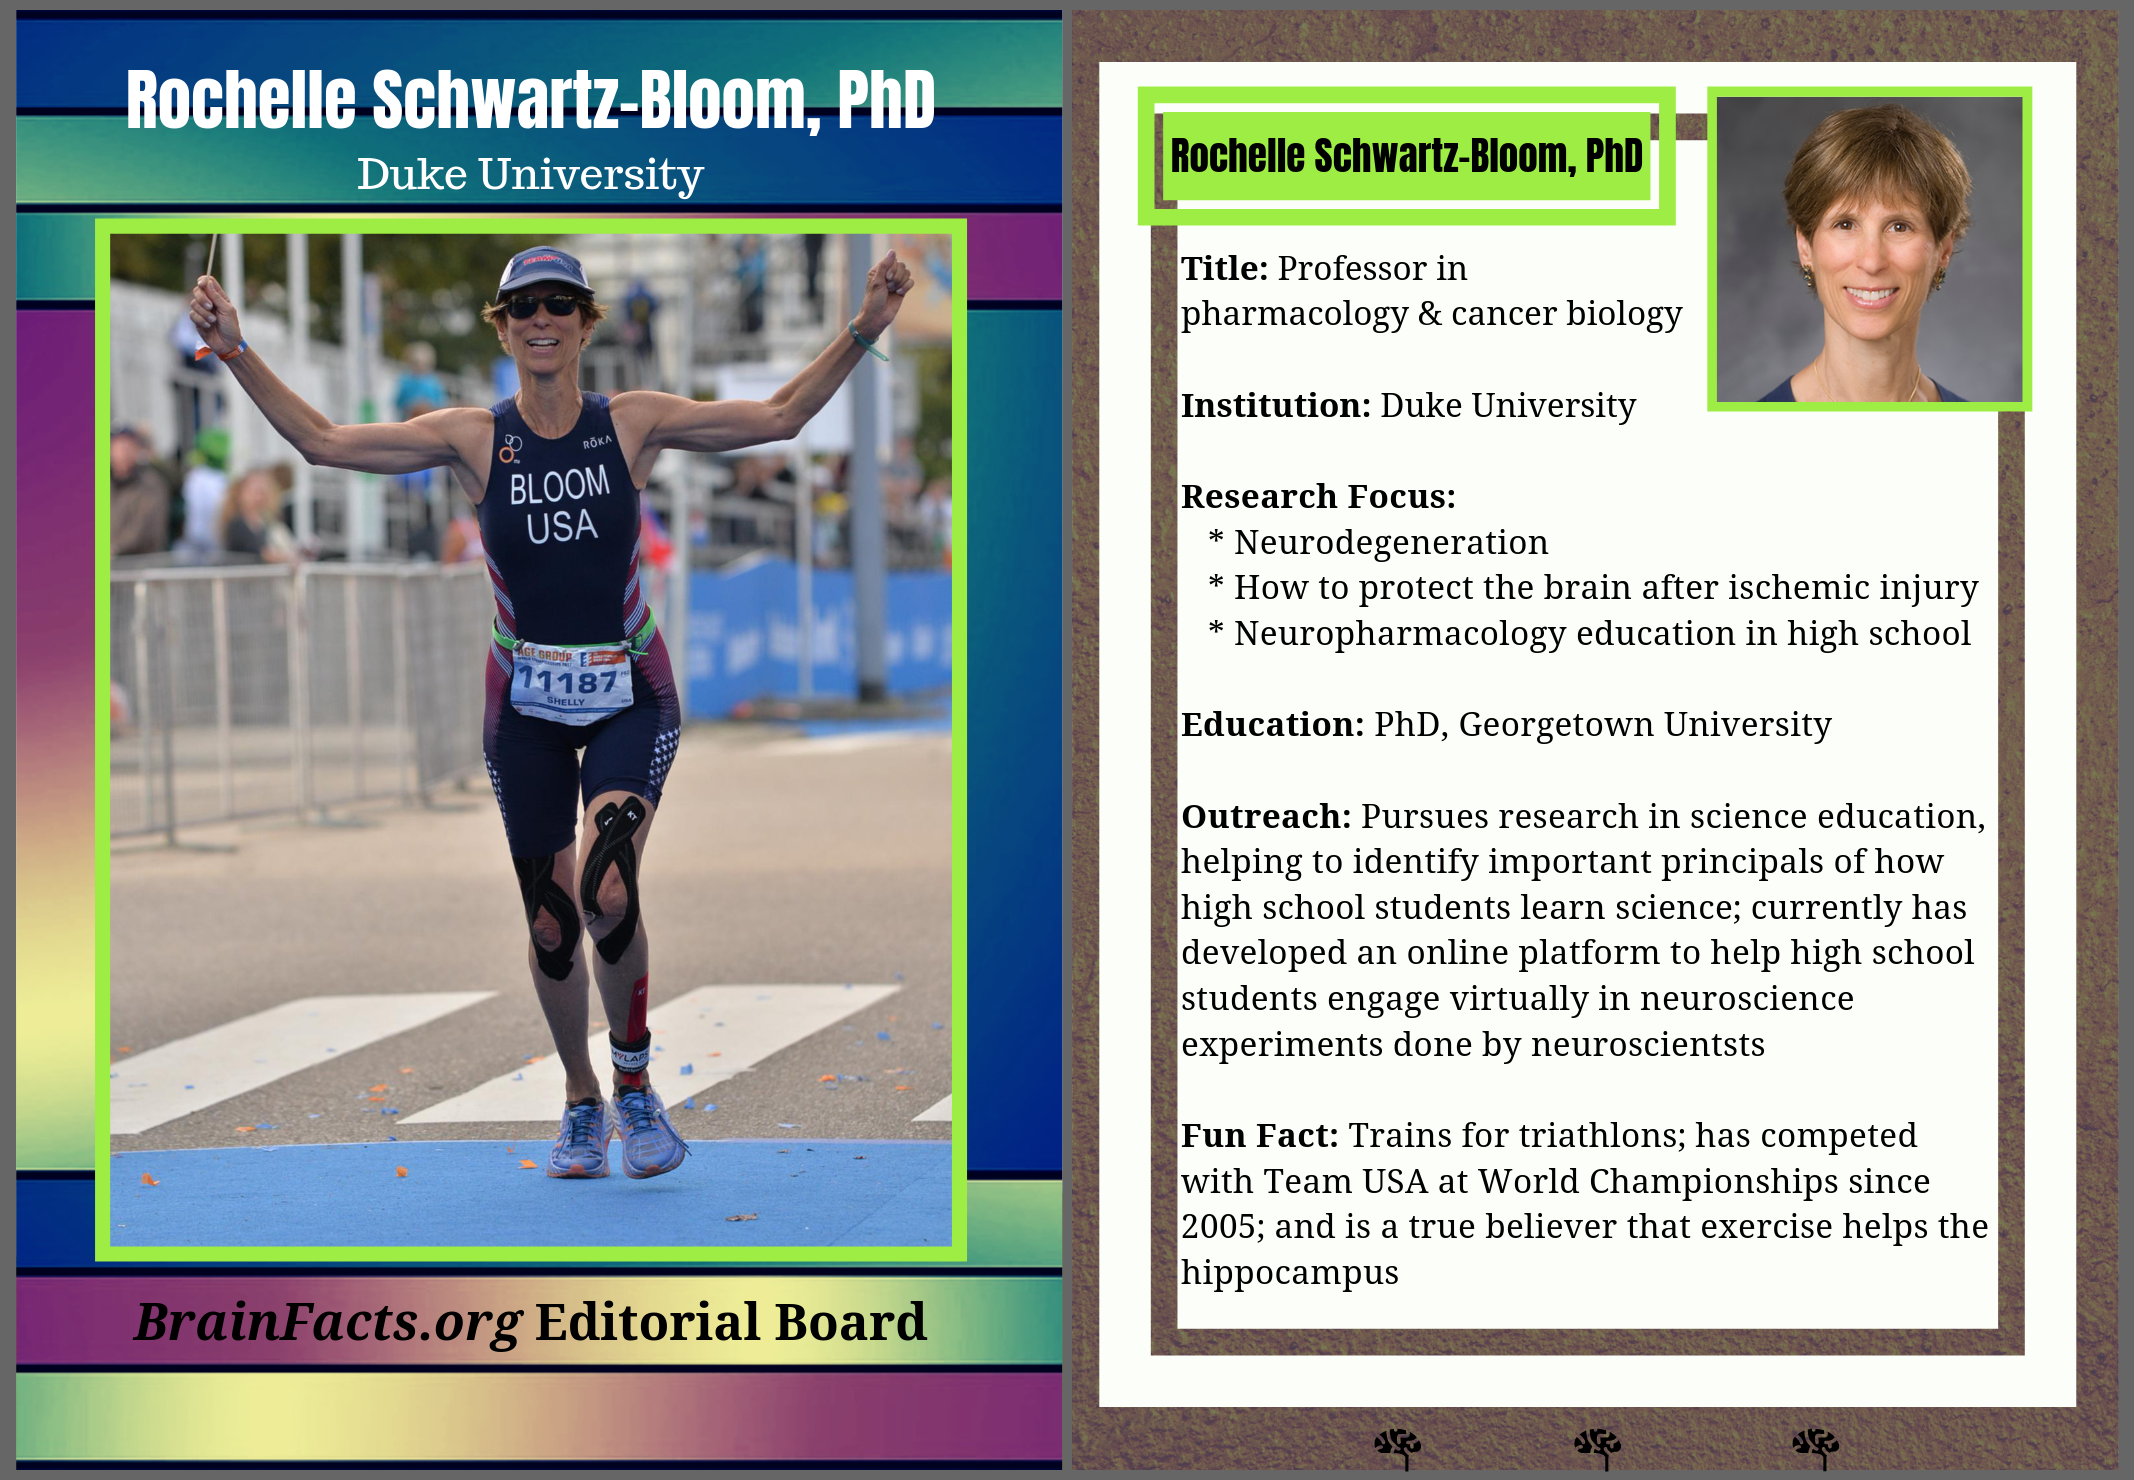 Photograph of Rochelle Schwartz-Bloom with bio to the right of it